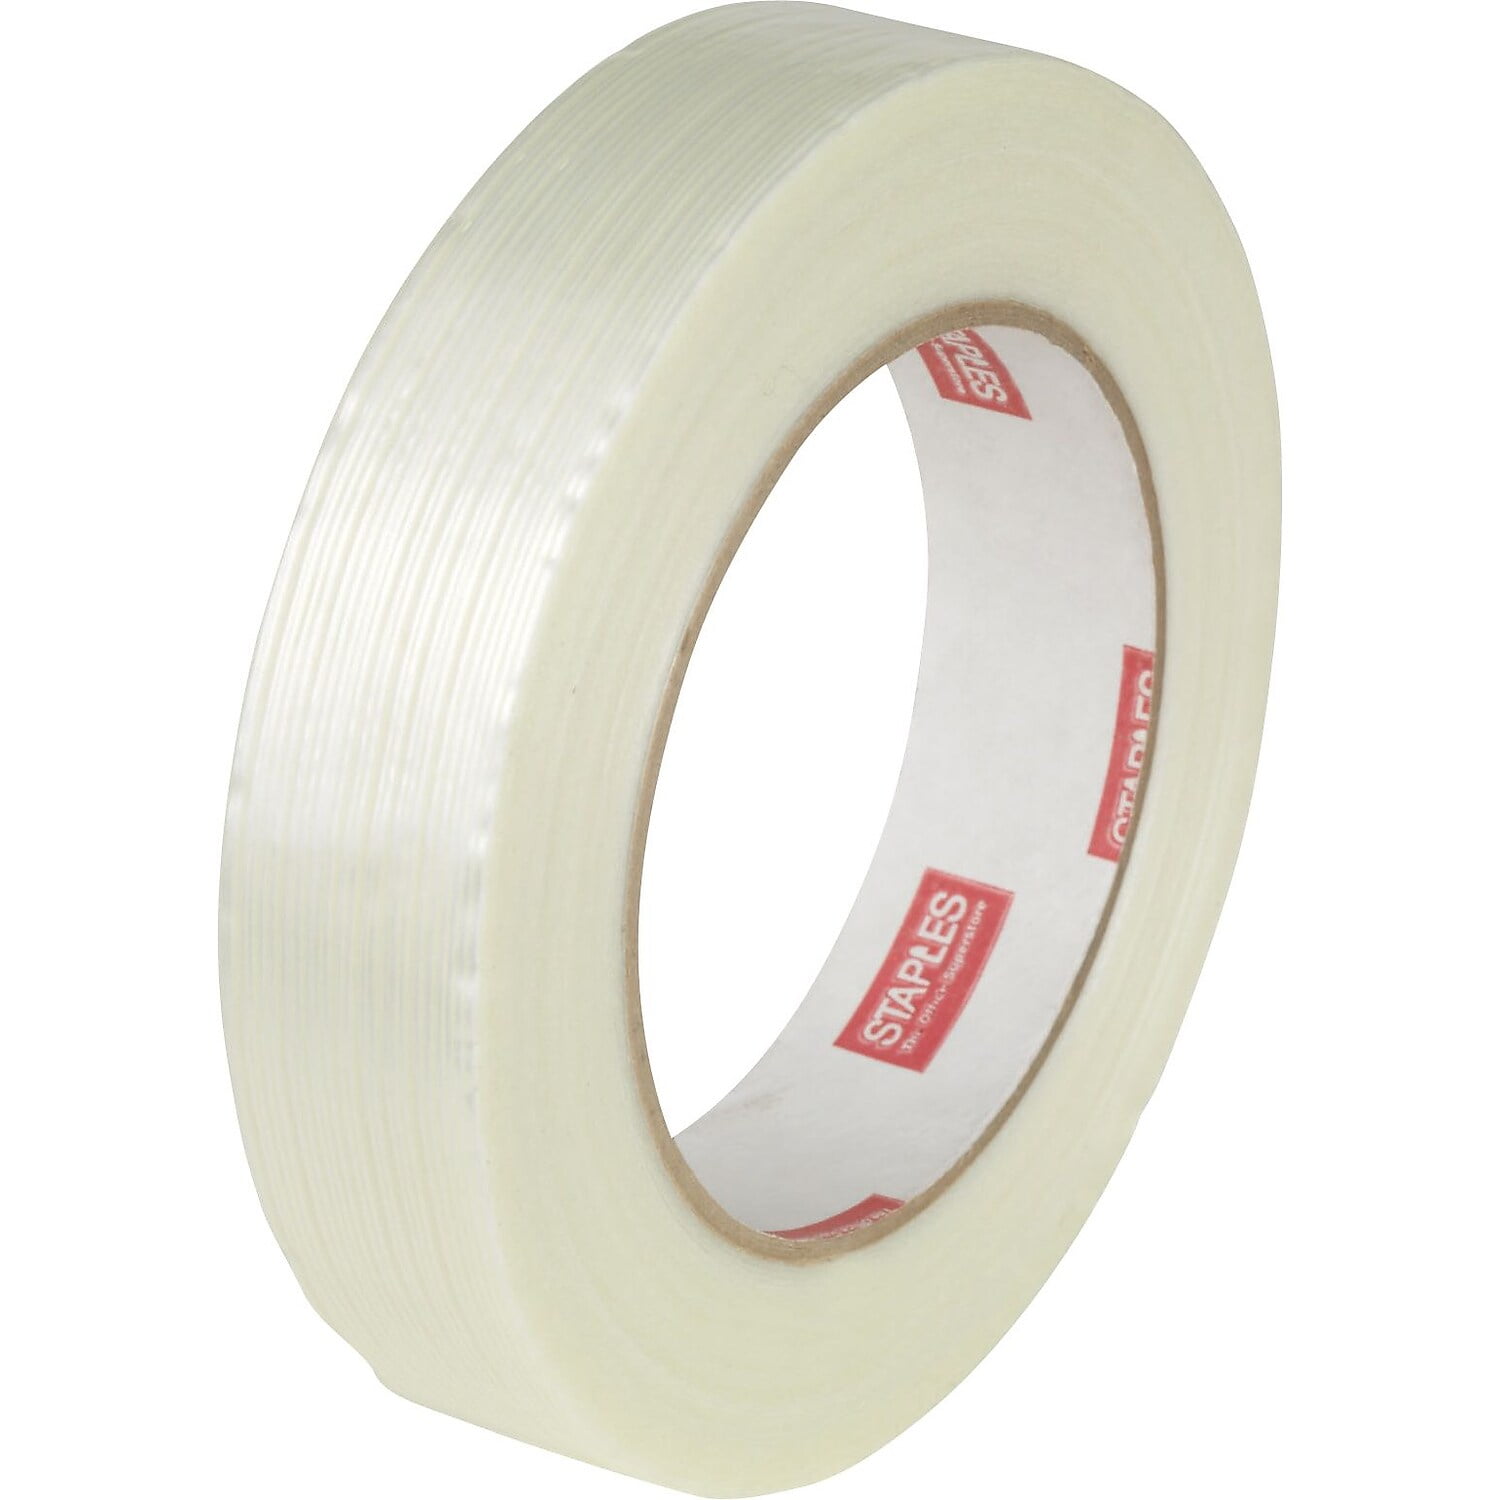 Sure-Max 6 Rolls Heavy-Duty Shipping & Packing Tape (2 x 60 yard/180' Each) - Moving & Adhesive Carton Sealing - 2.7mil Clear